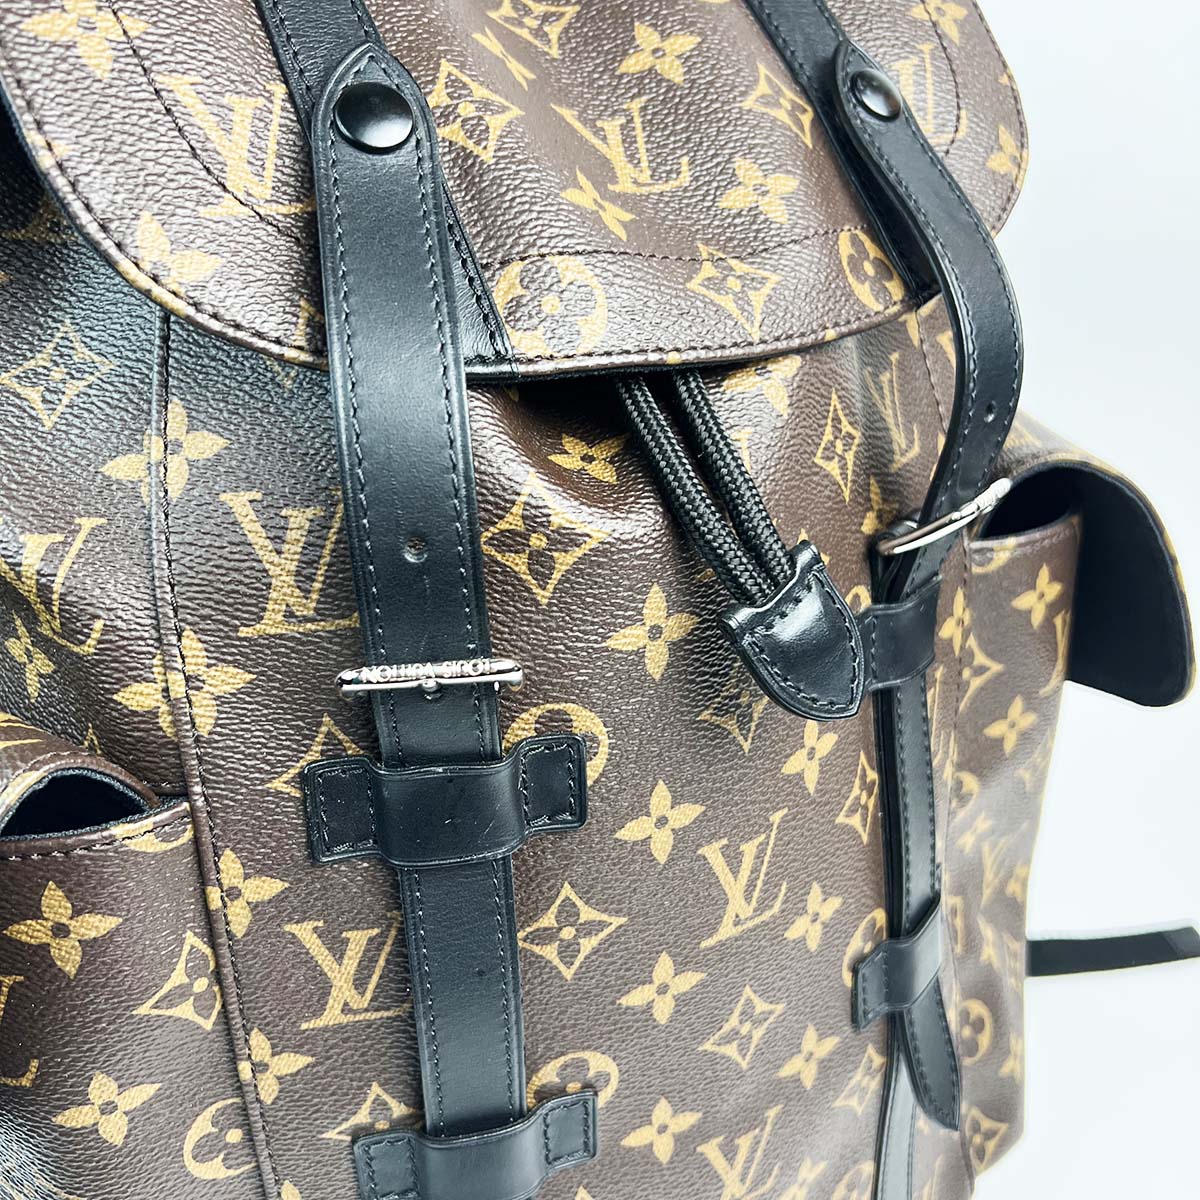 Louis+Vuitton+Christopher+Backpack+PM+Black+Leather+Monogram+Taurillon for  sale online